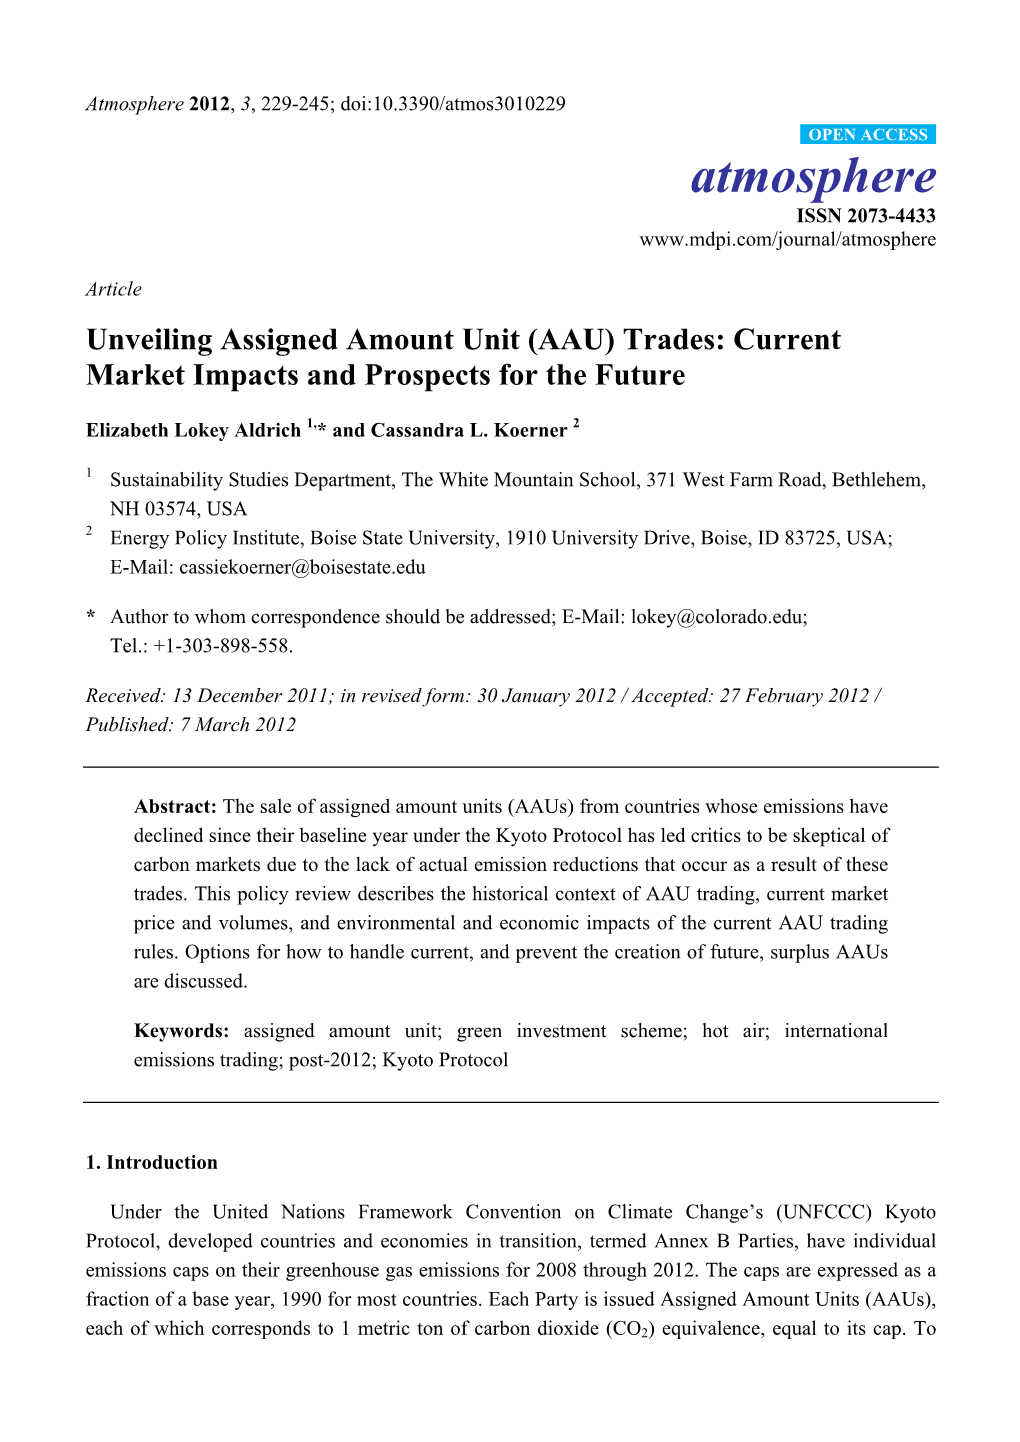 Unveiling Assigned Amount Unit (AAU) Trades: Current Market Impacts and Prospects for the Future